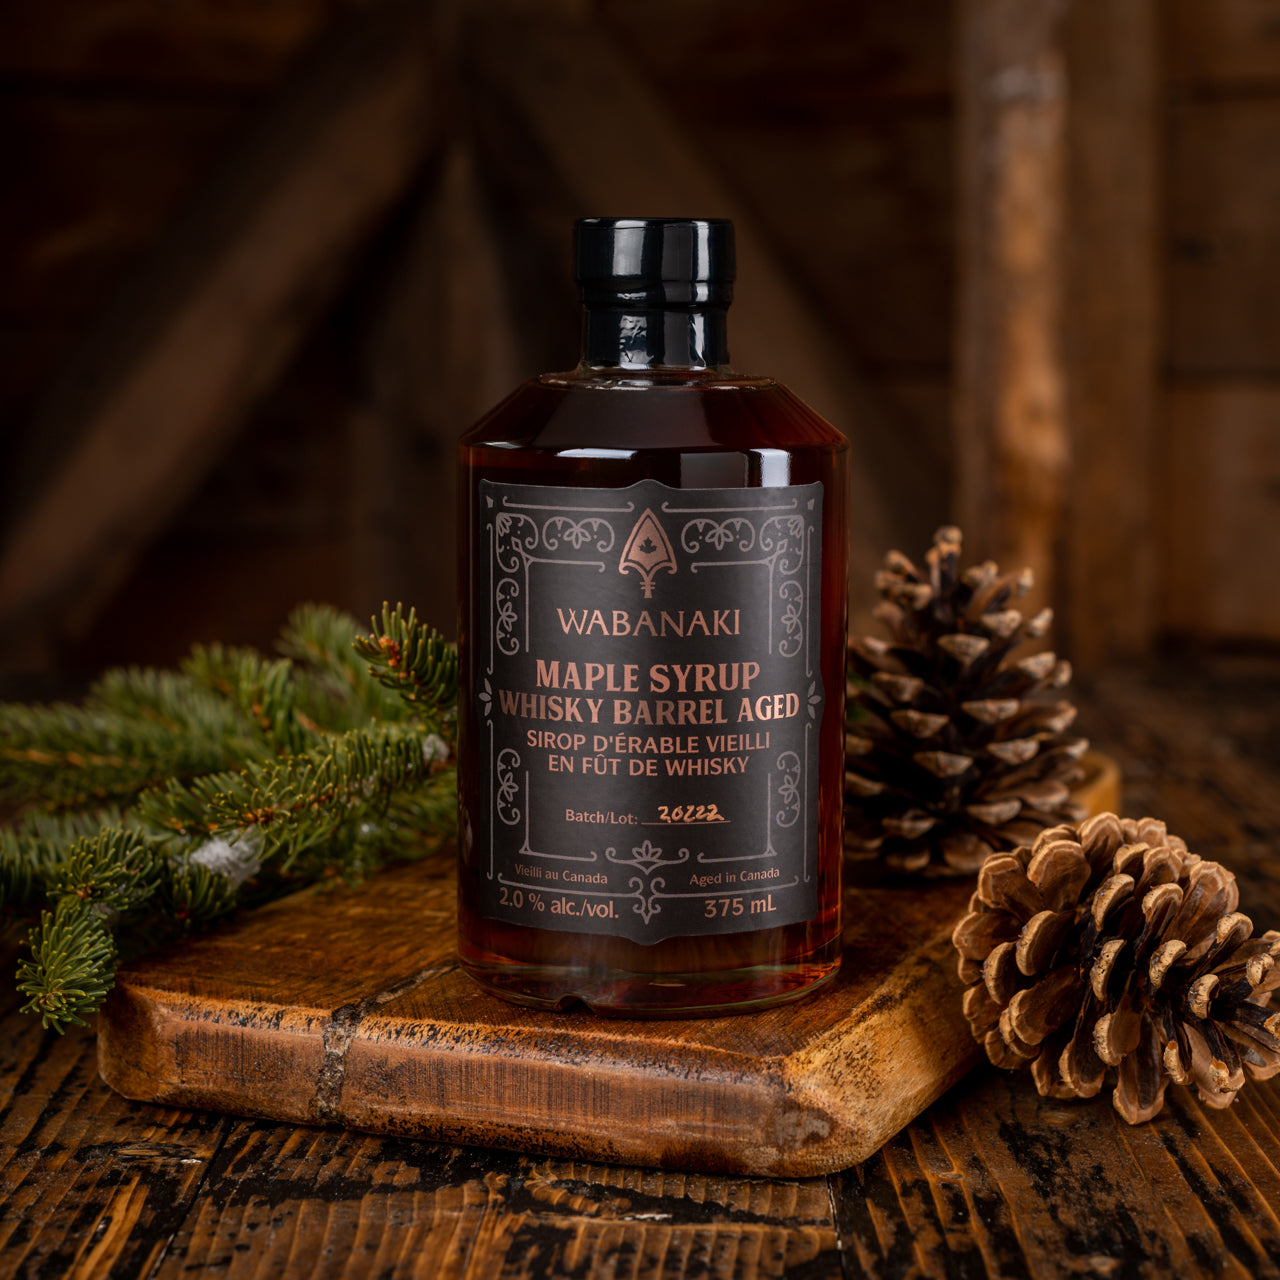 Wabanaki Maple Syrup, Barrel aged in a Whisky Barrel. 100% Indigenous, Female owned company